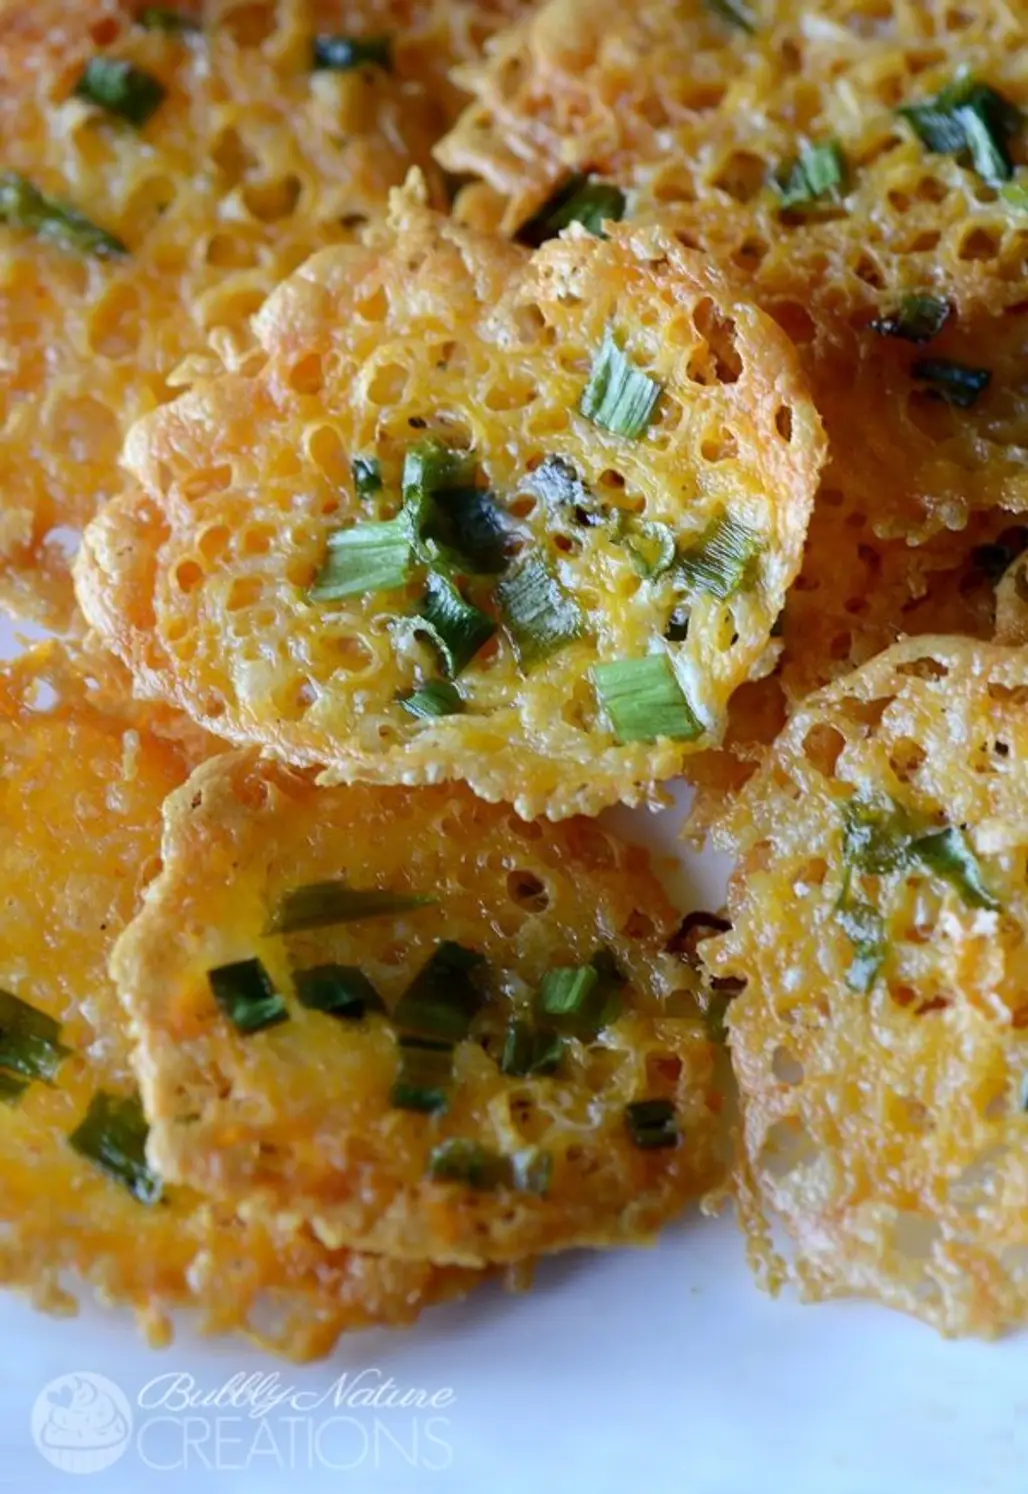 Crispy Cheddar Cheese and Green Onion Chips